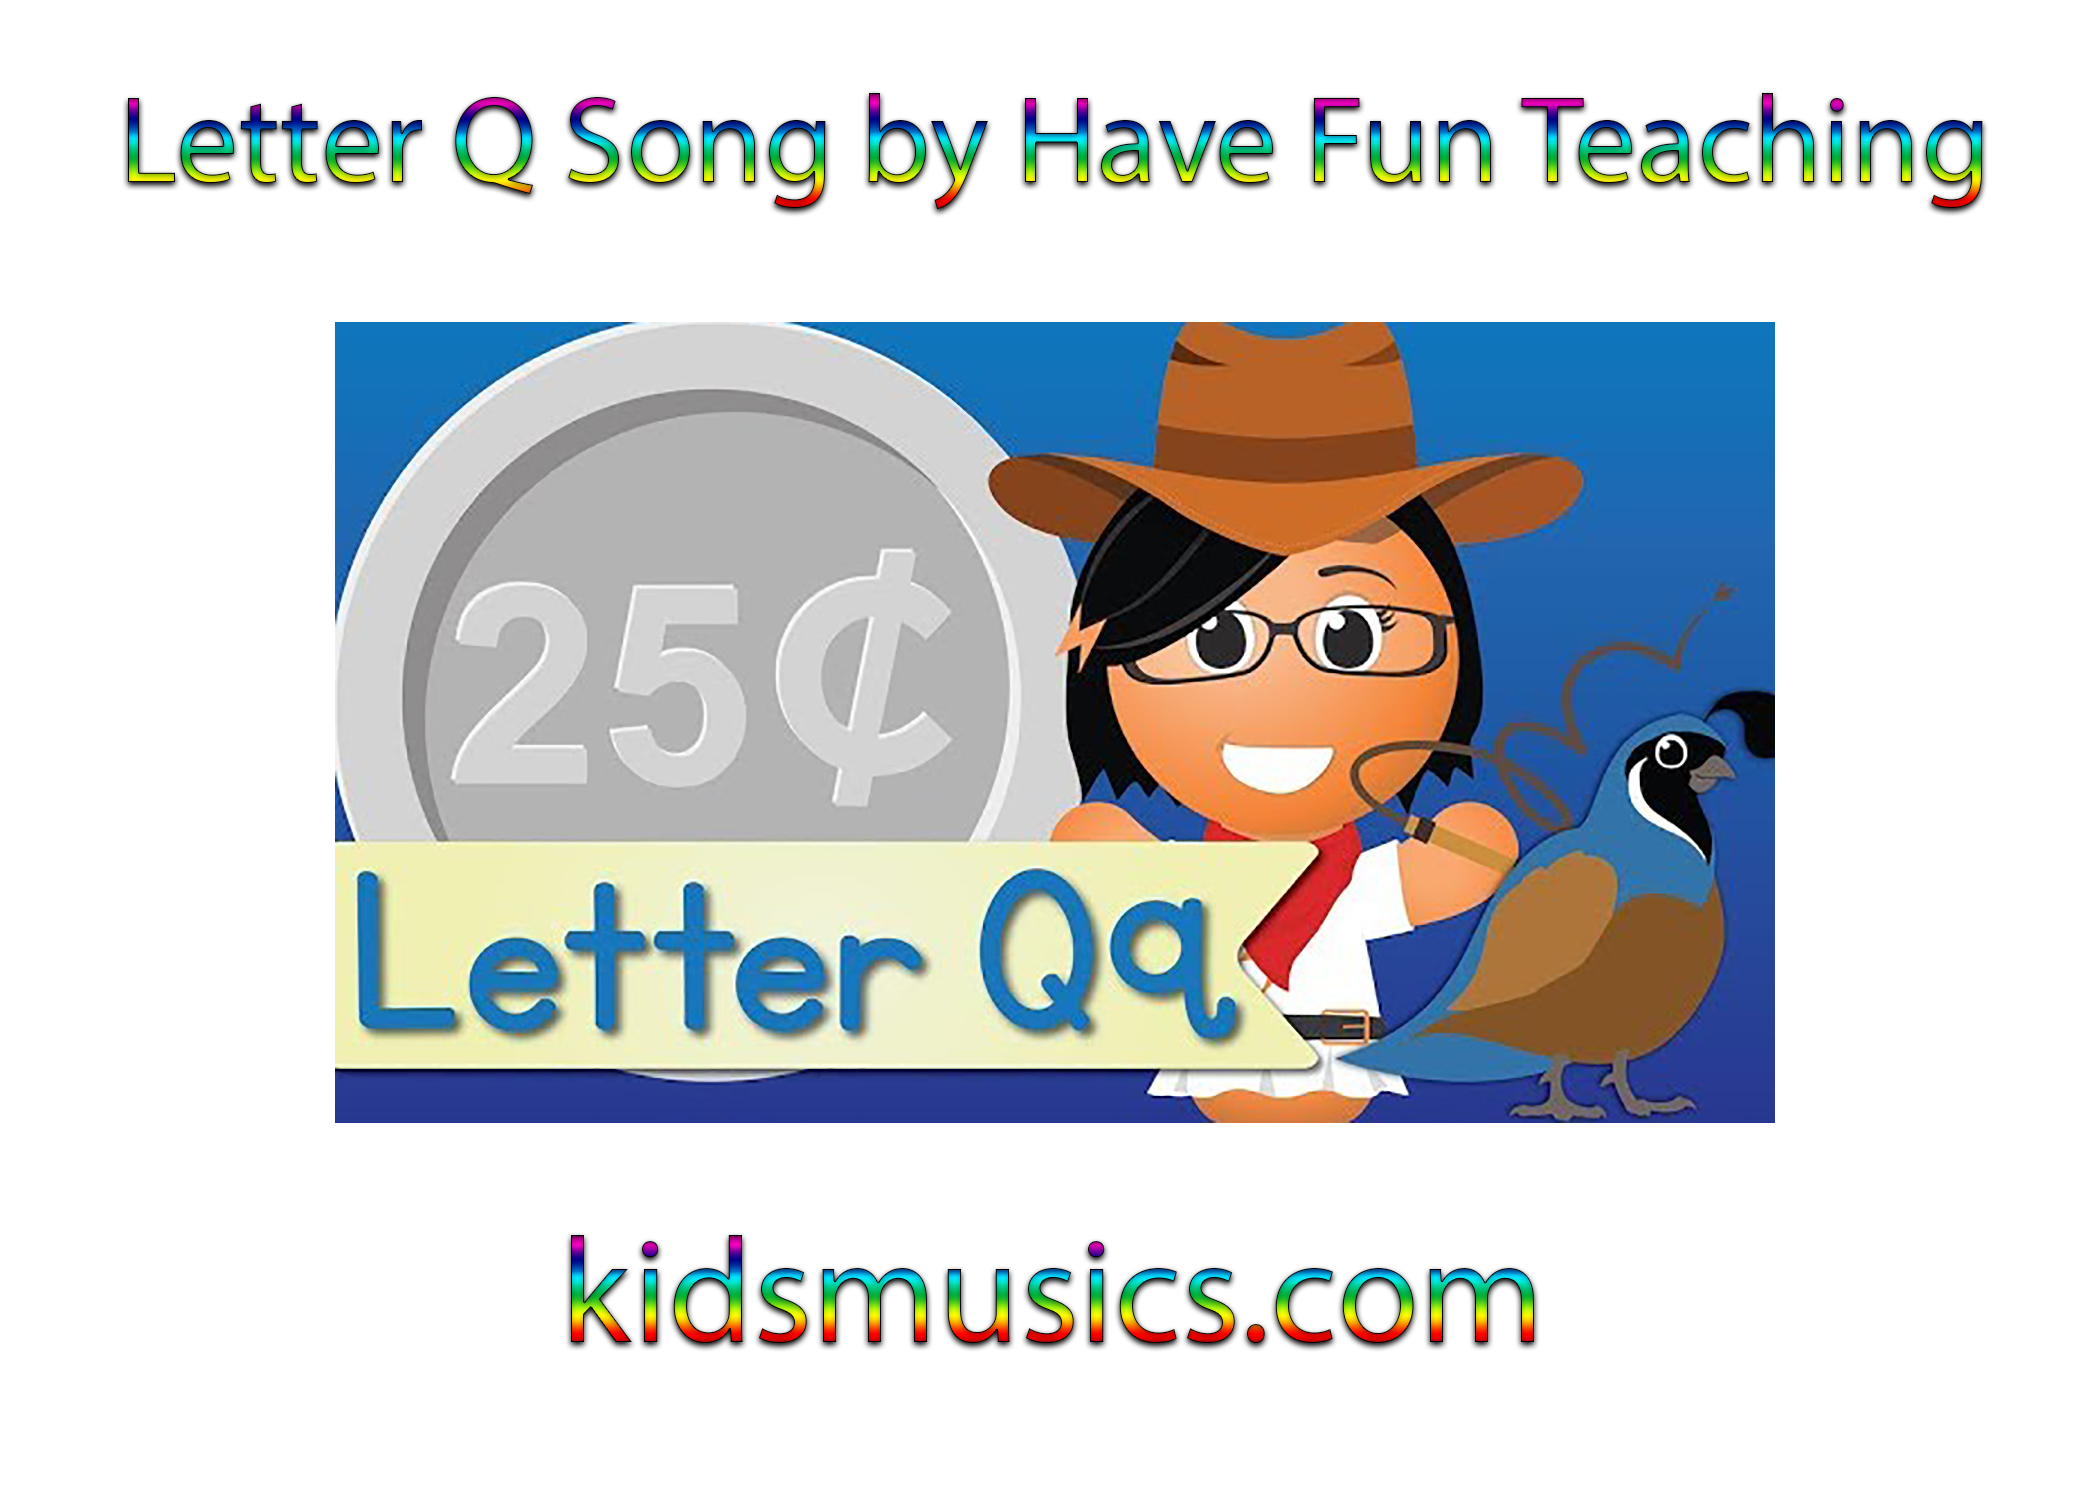 Letter Q Song by Have Fun Teaching